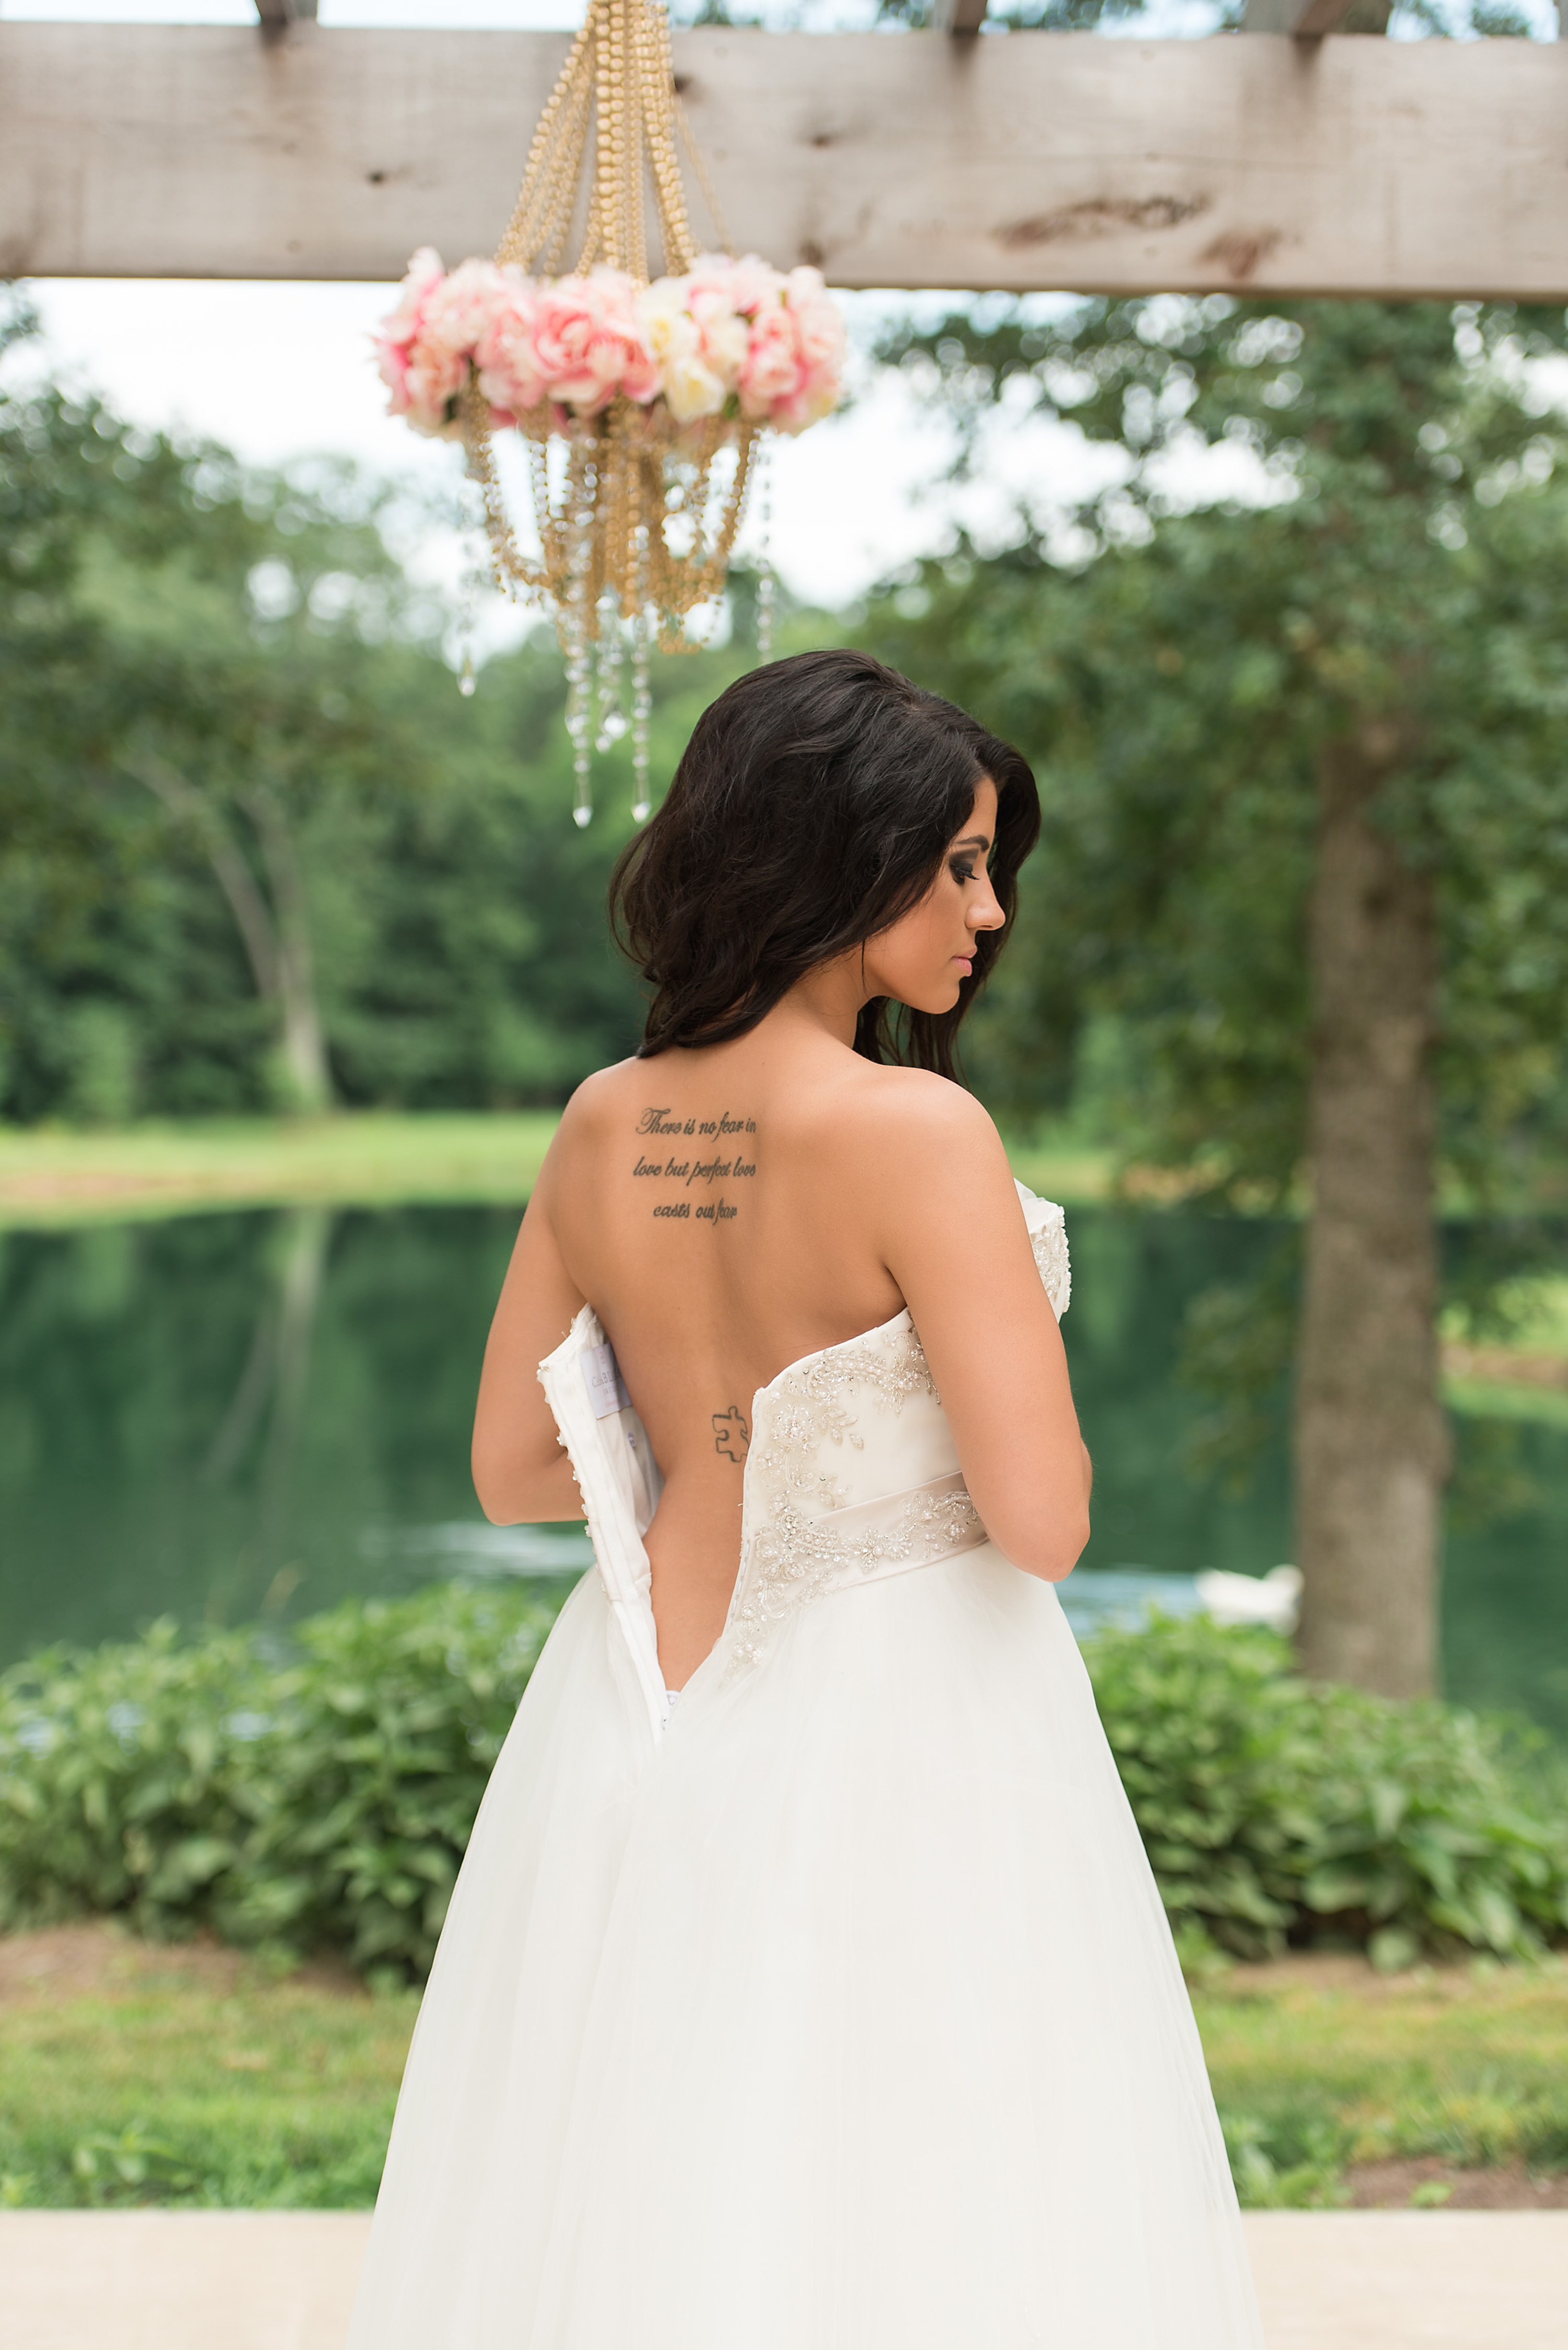 Jessica + Russell | Married | 06.21.2014